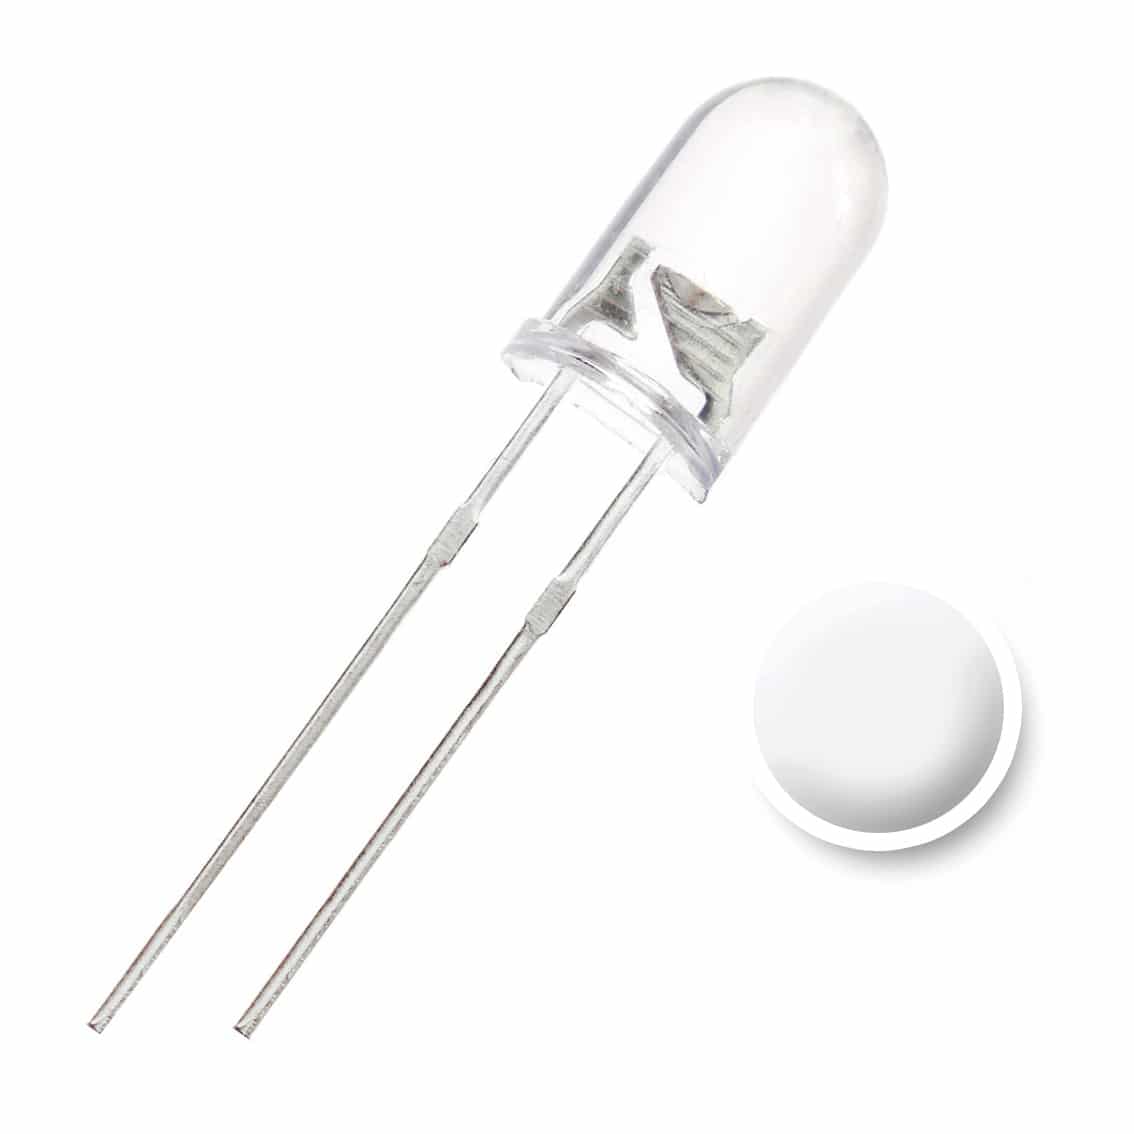 5 mm 12 Volt Warm White LED's with Water Clear Lens Pack of 5 